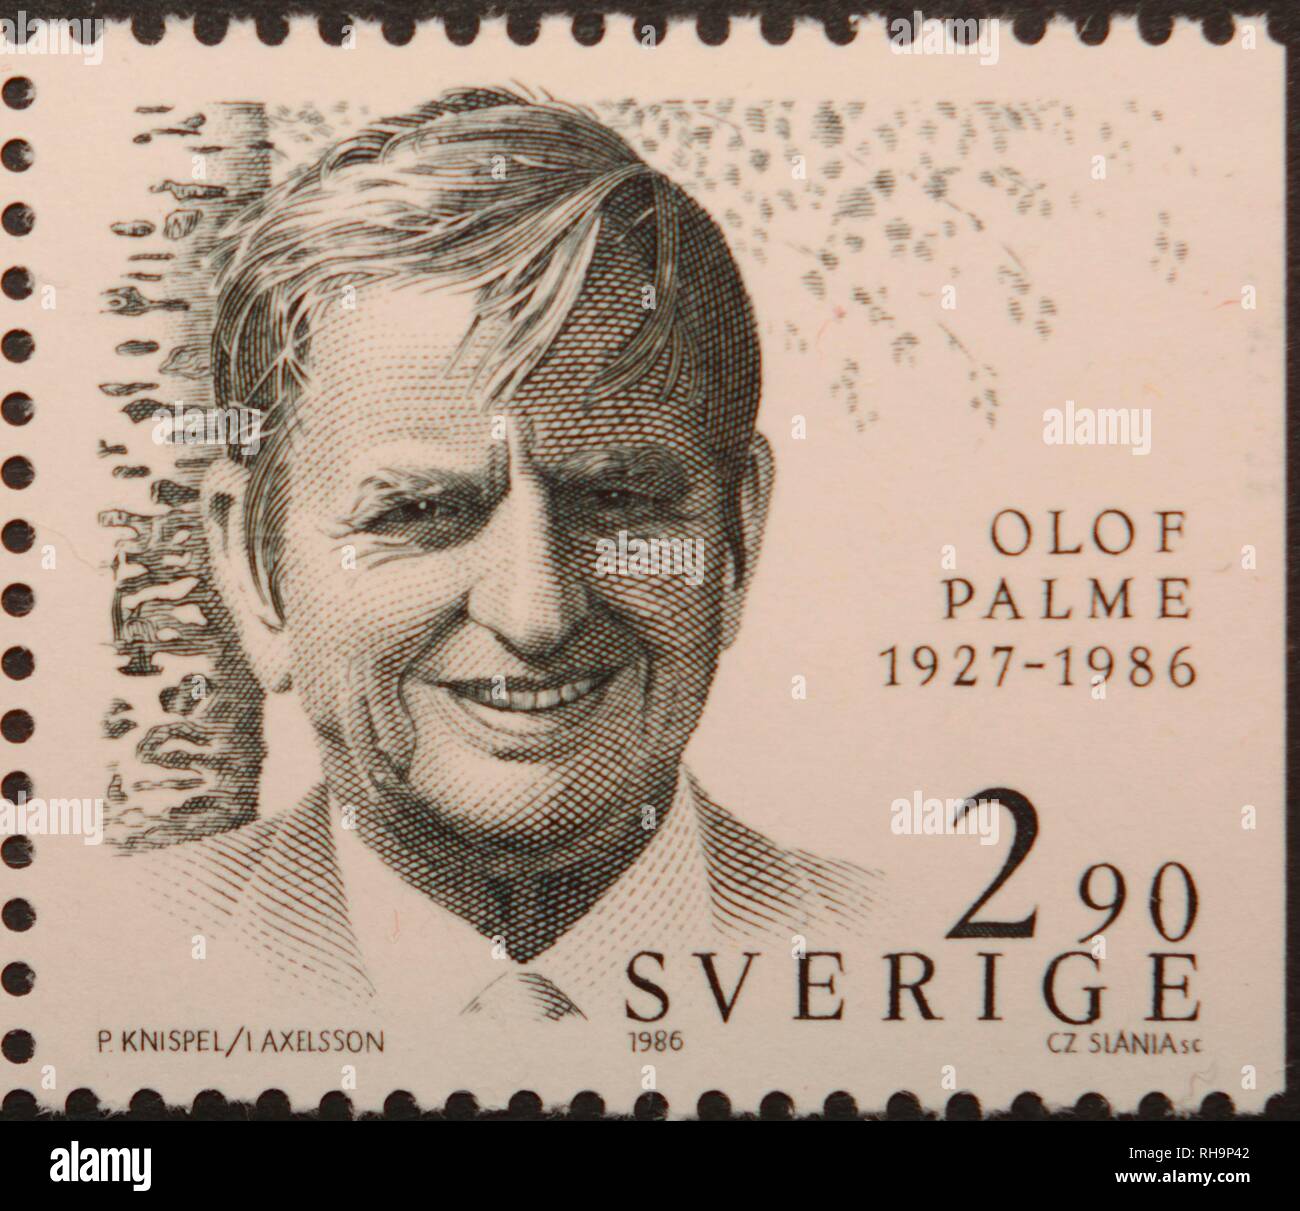 Olof Palme, a Swedish politician and prime minister, portrait on a Swedish stamp, Sweden Stock Photo